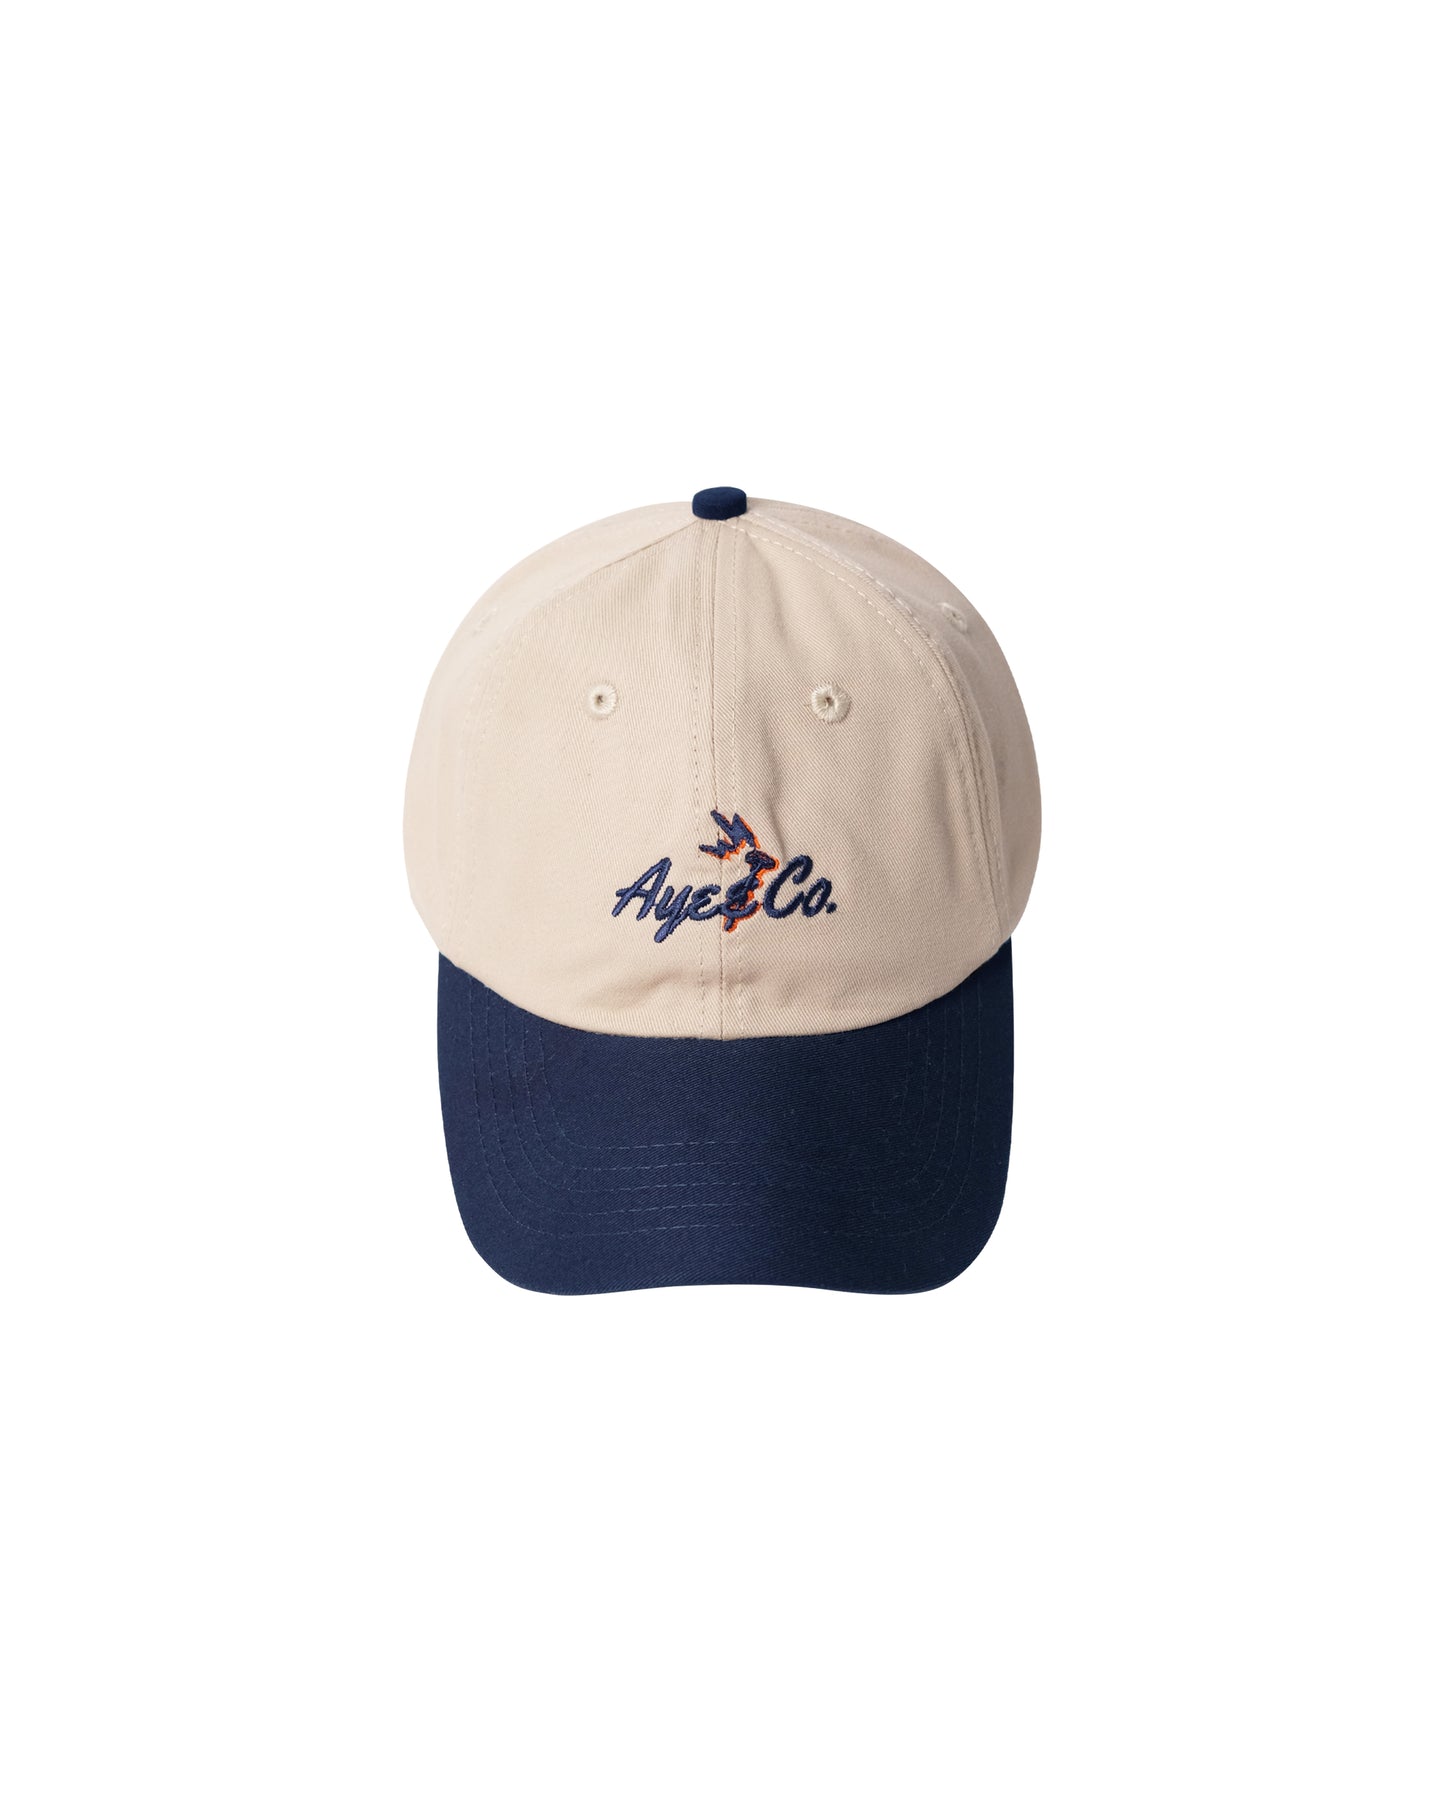 Anabe Two Tone Cap - Navy